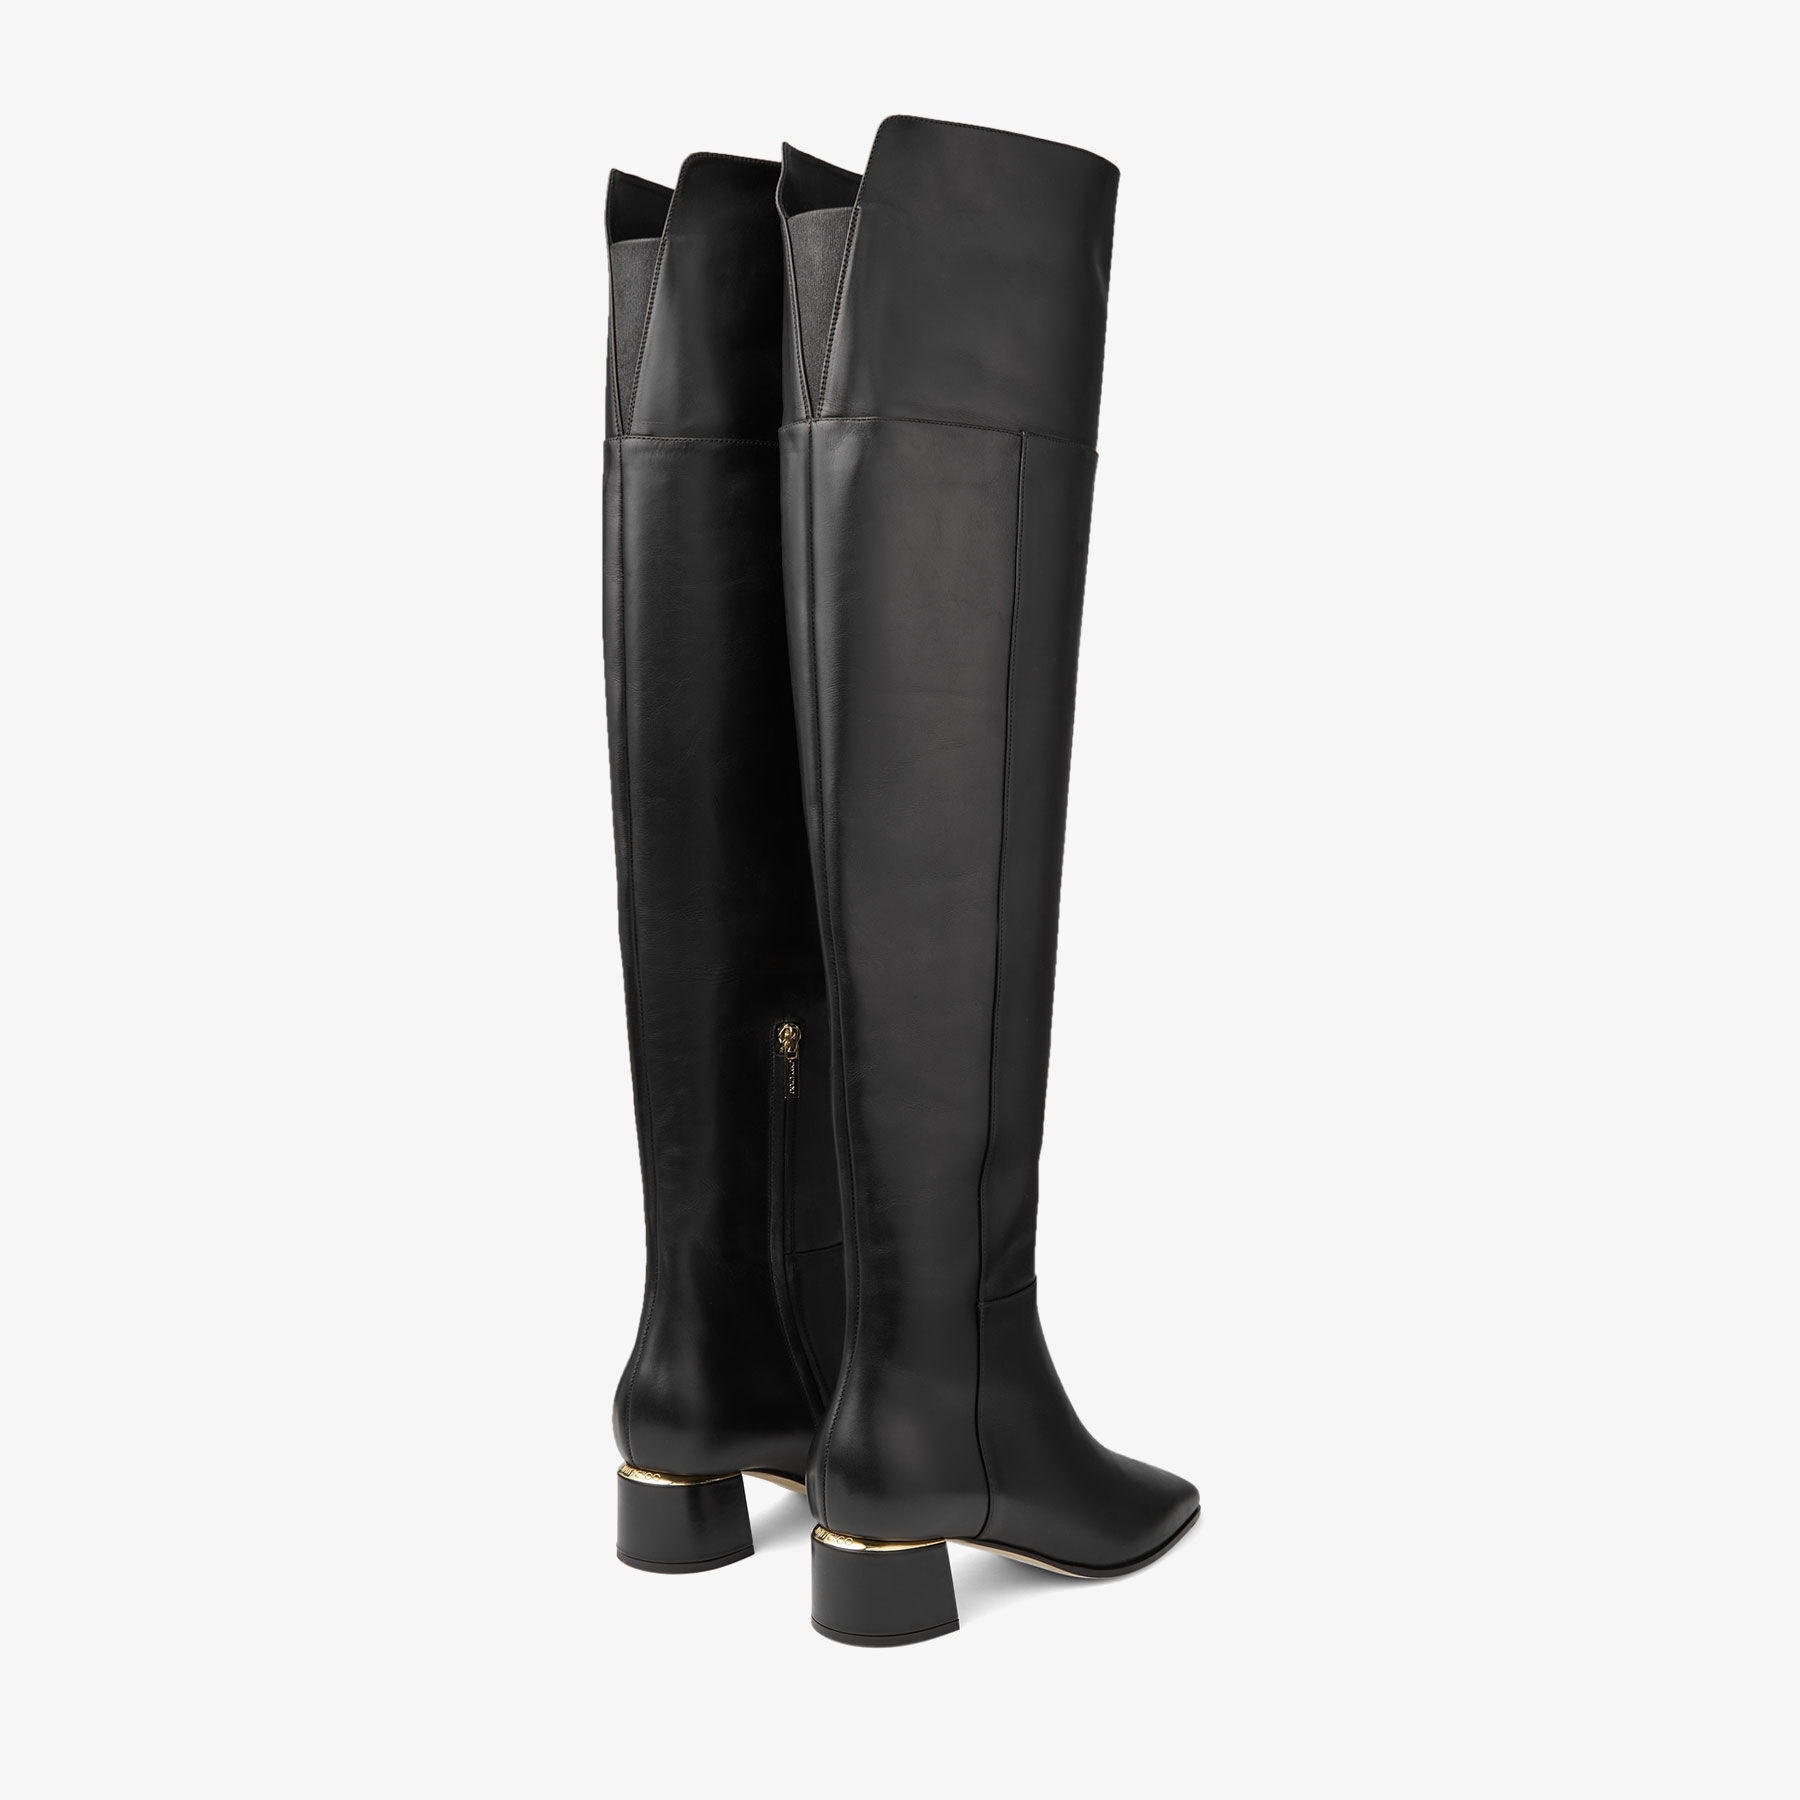 Loren Over The Knee 45
Black Calf Leather Over-The-Knee Boots - 5